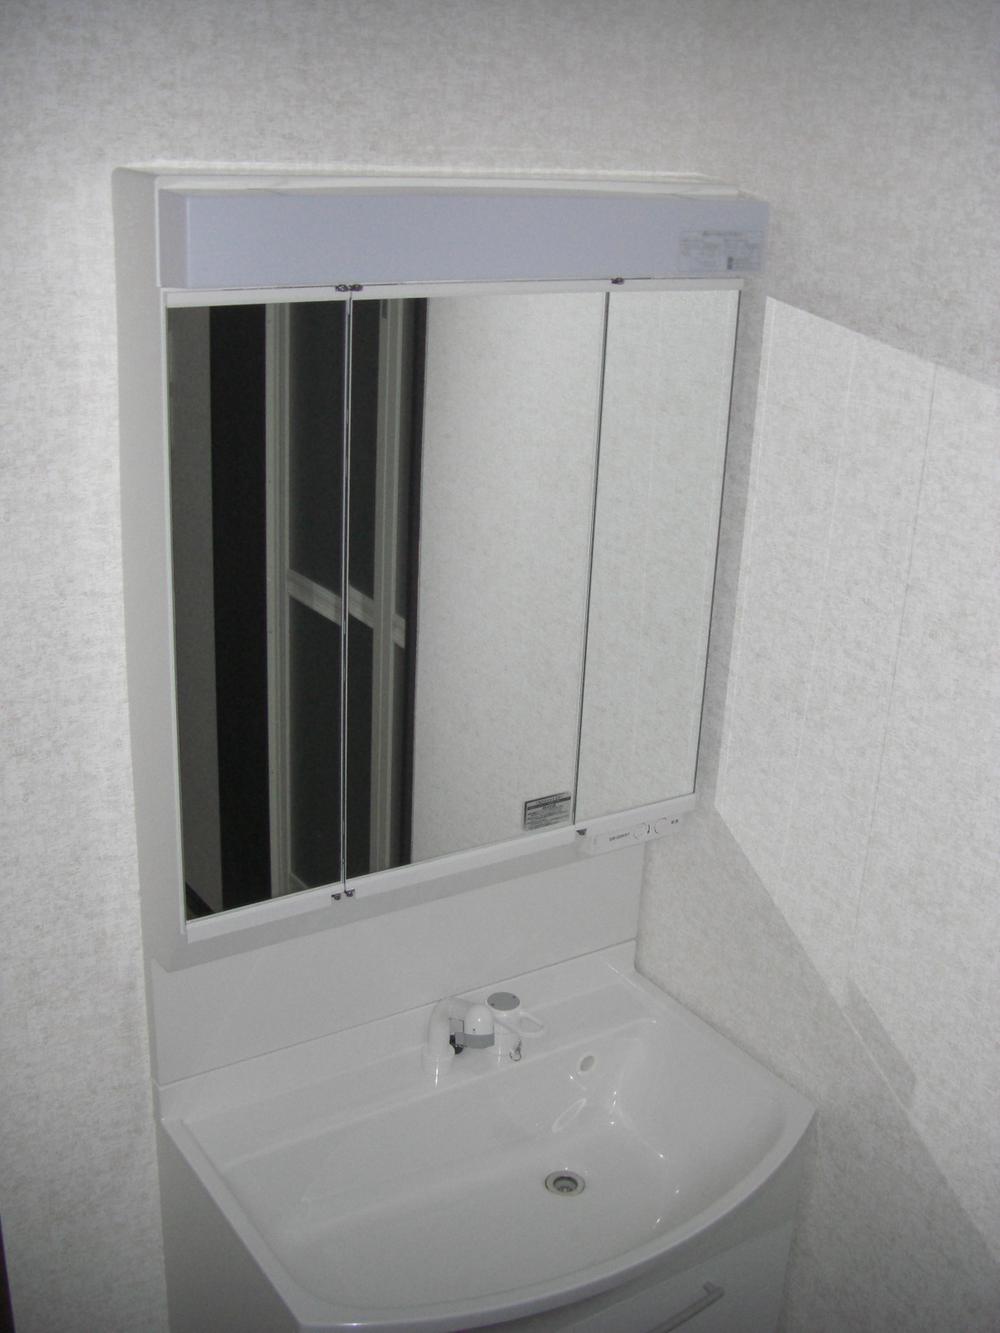 Building plan example (introspection photo). Vanity triple mirror, You can also happily fashionable before going out. 